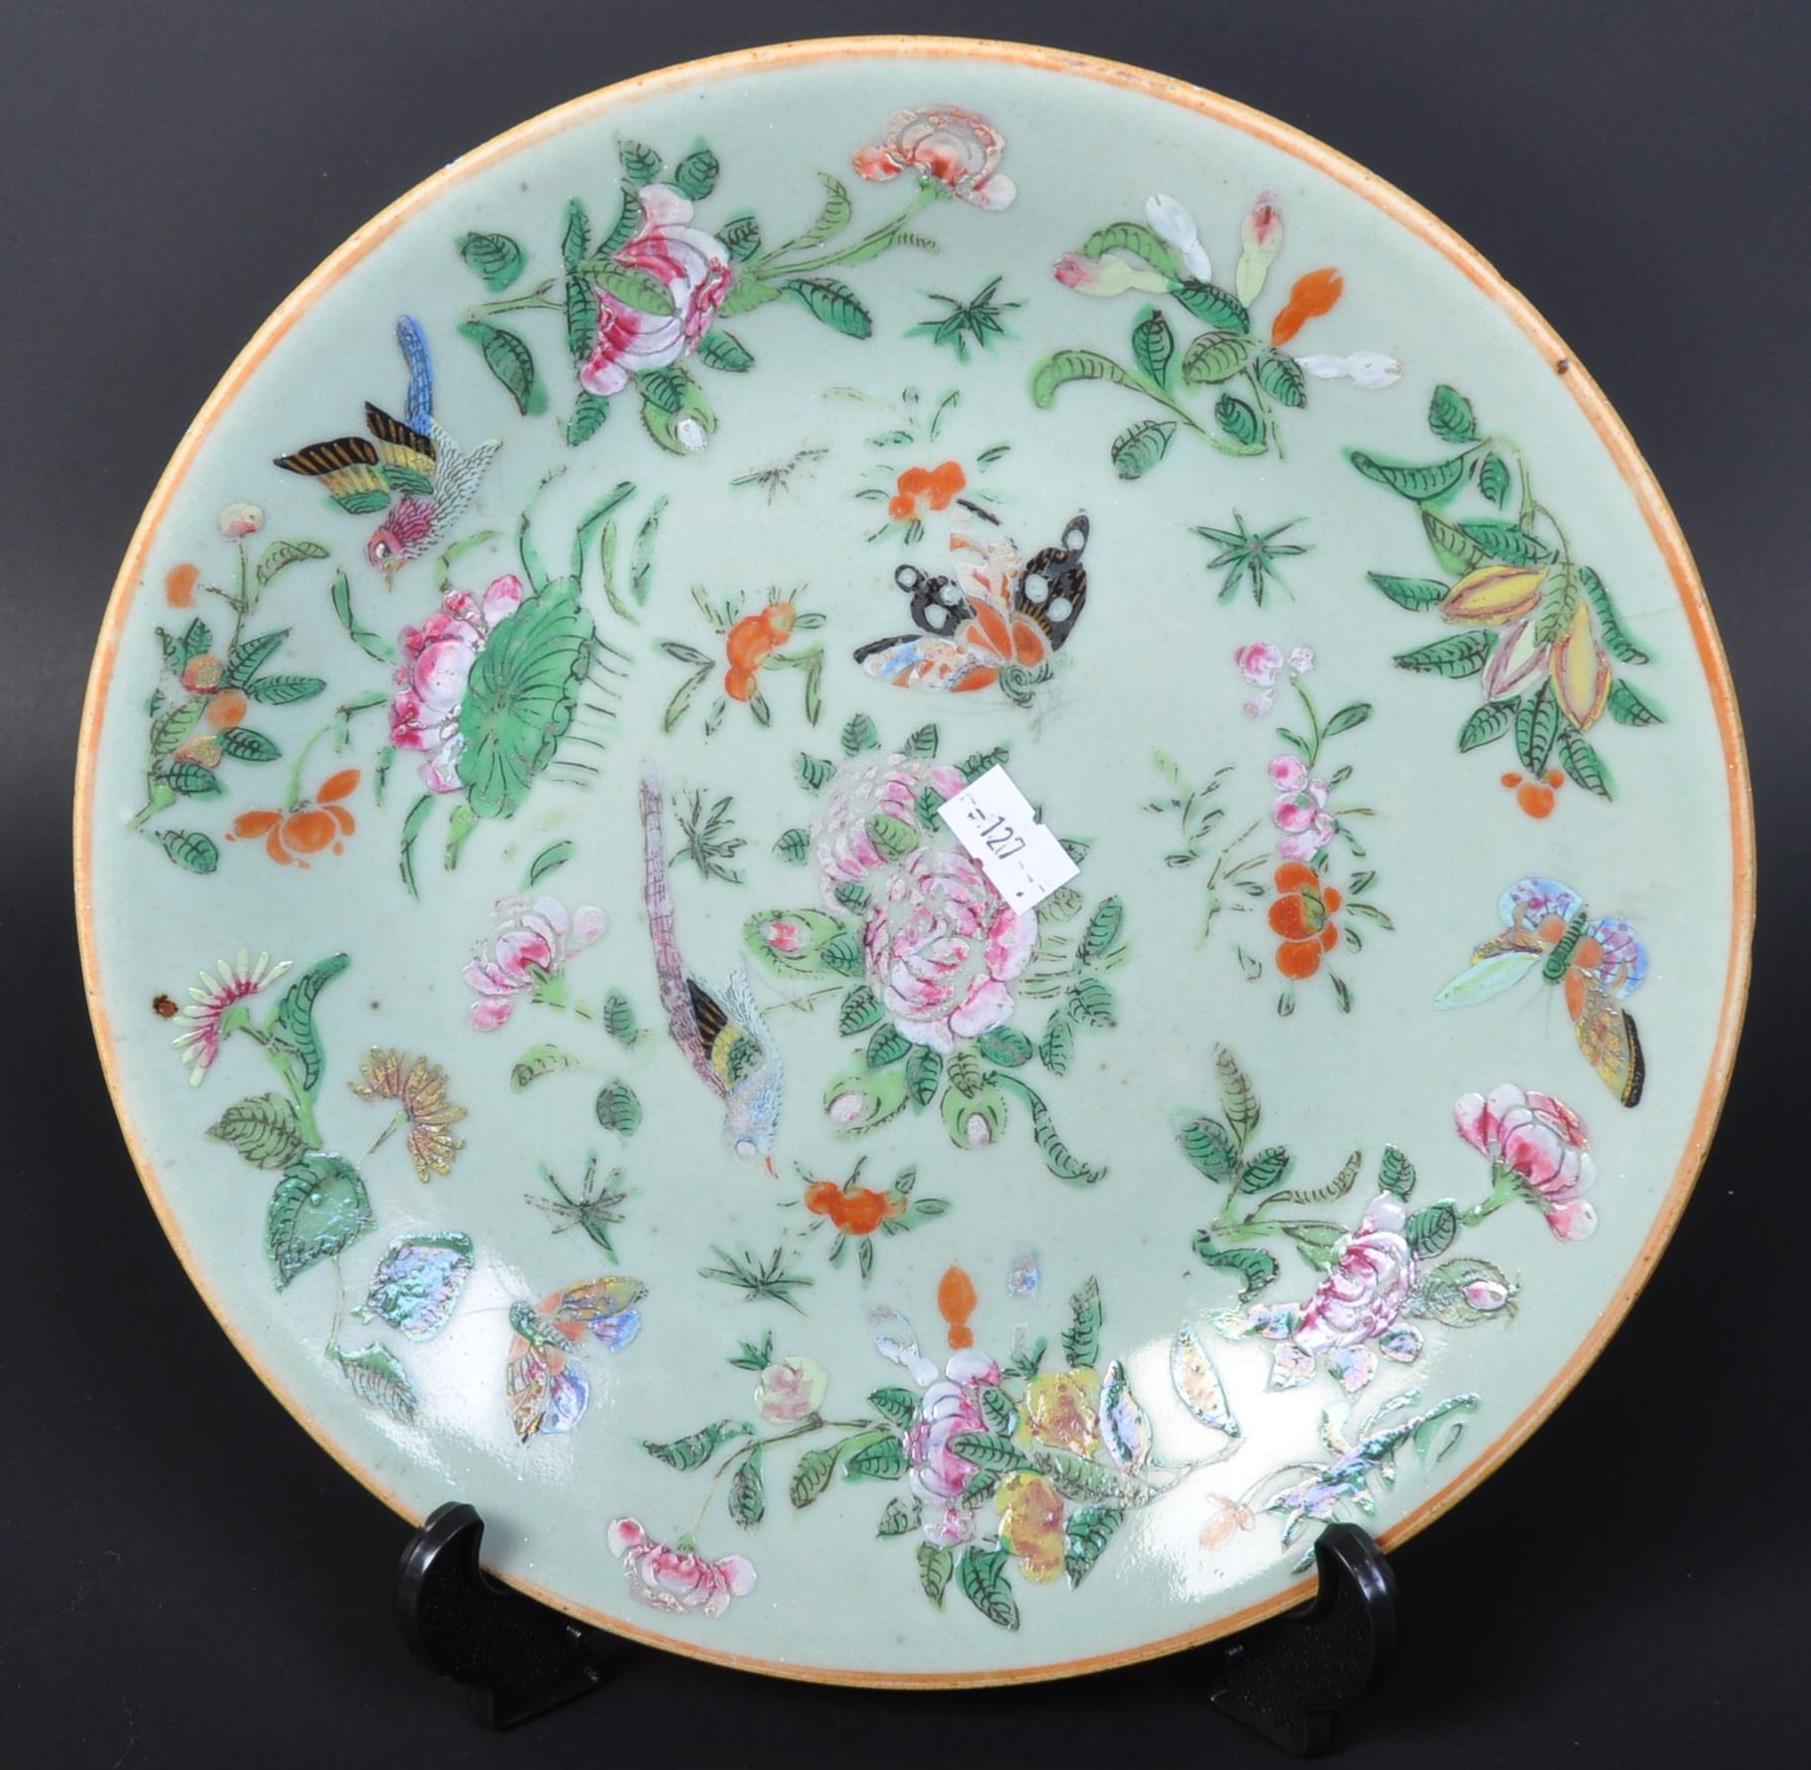 EARLY 19TH CENTURY CIRCA 1820S CHINESE PLATE